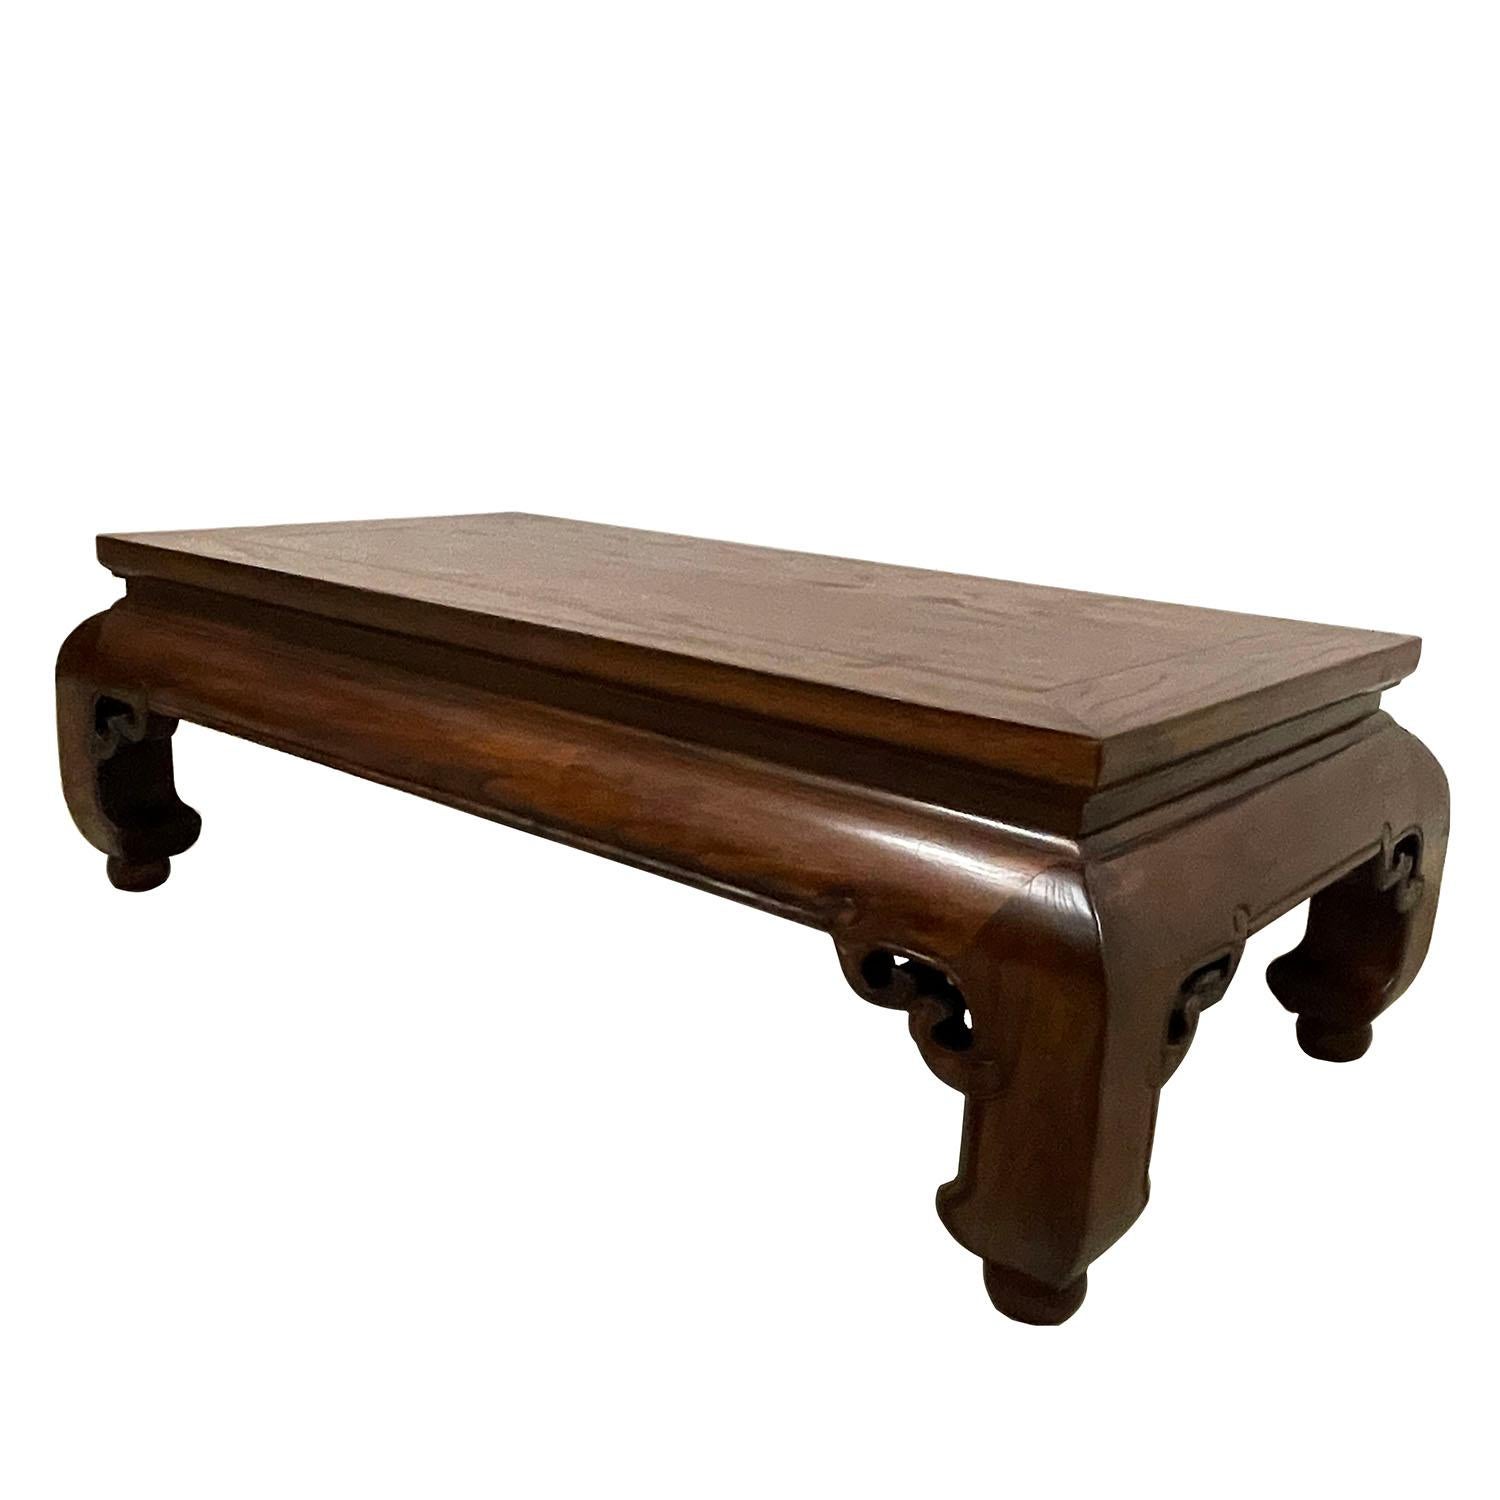 This vintage Chinese carved Ming Dynasty style coffee table is made of solid Elm wood with natural finished. It has narrow carved waist and four big banana legs which is typical Ming dynasty style. Very smooth to touch and full of patina. You can